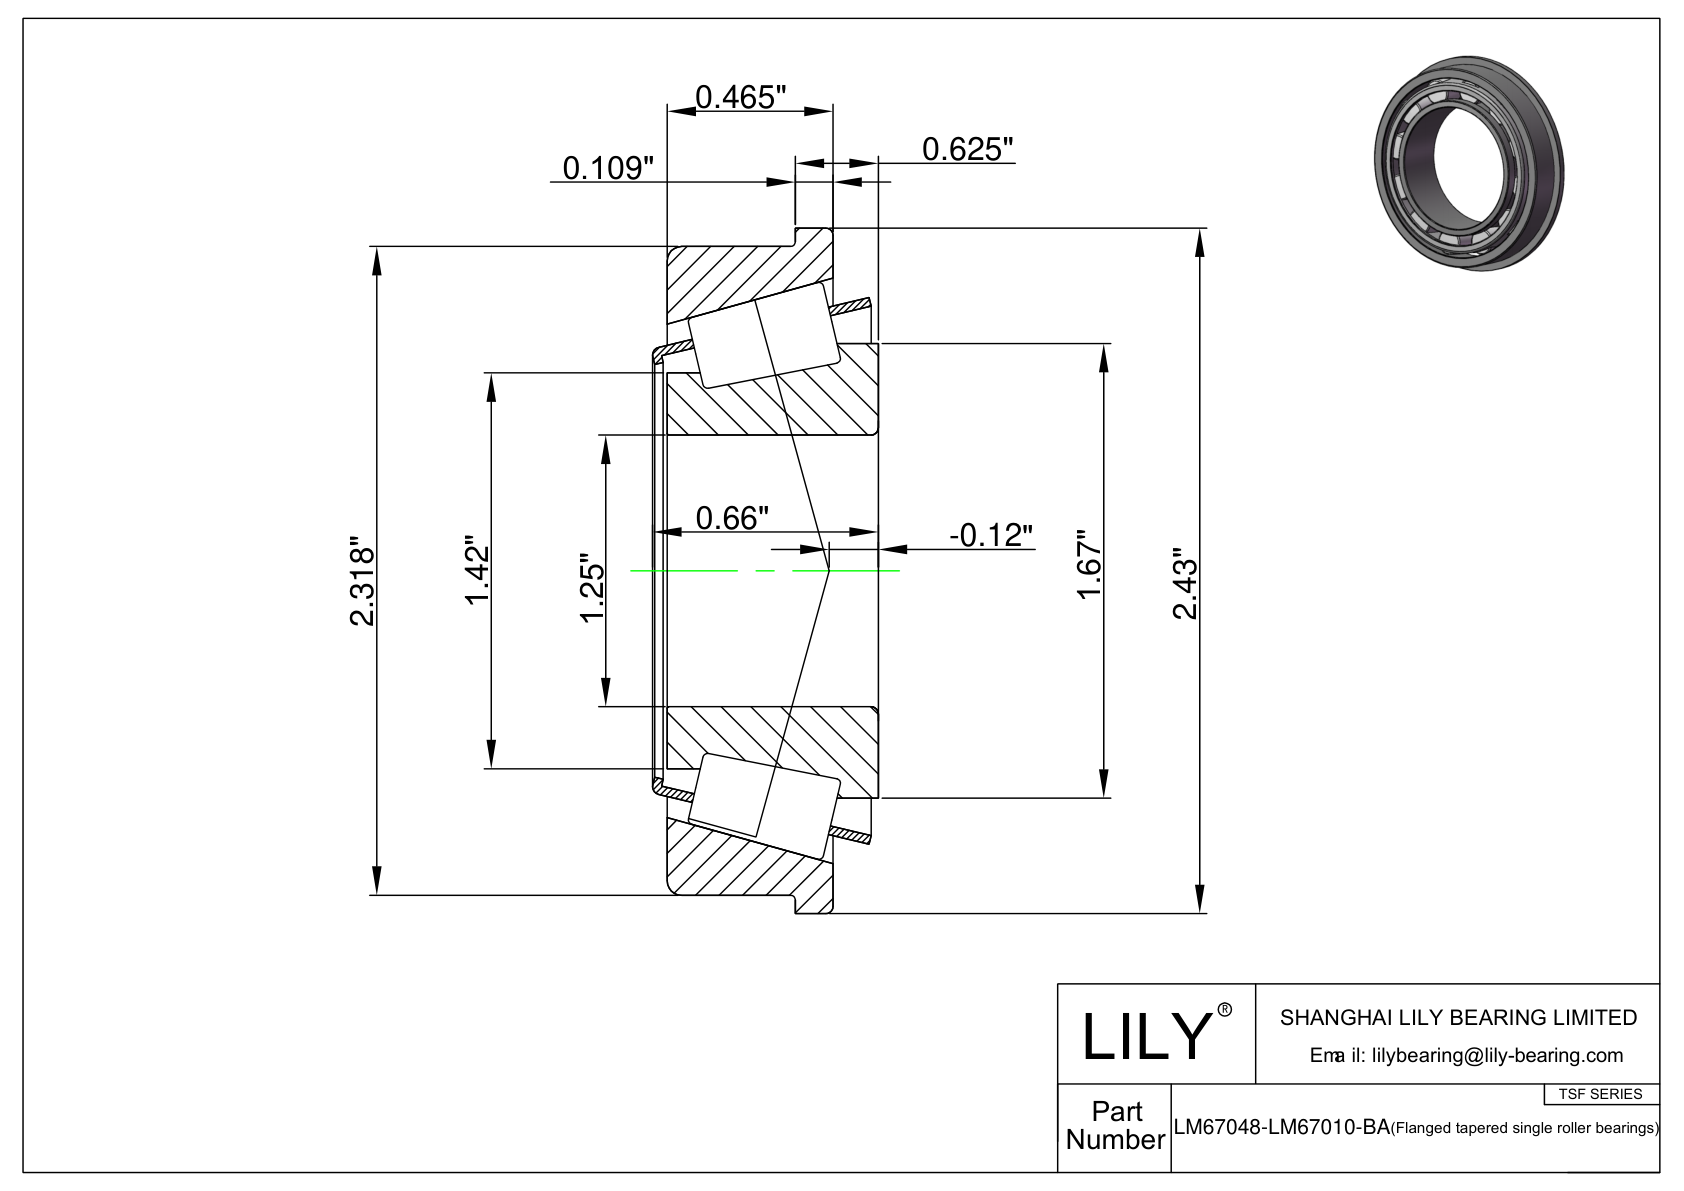 LM67048-LM67010-BA TSF (Tapered Single Roller Bearings with Flange) (Imperial) cad drawing